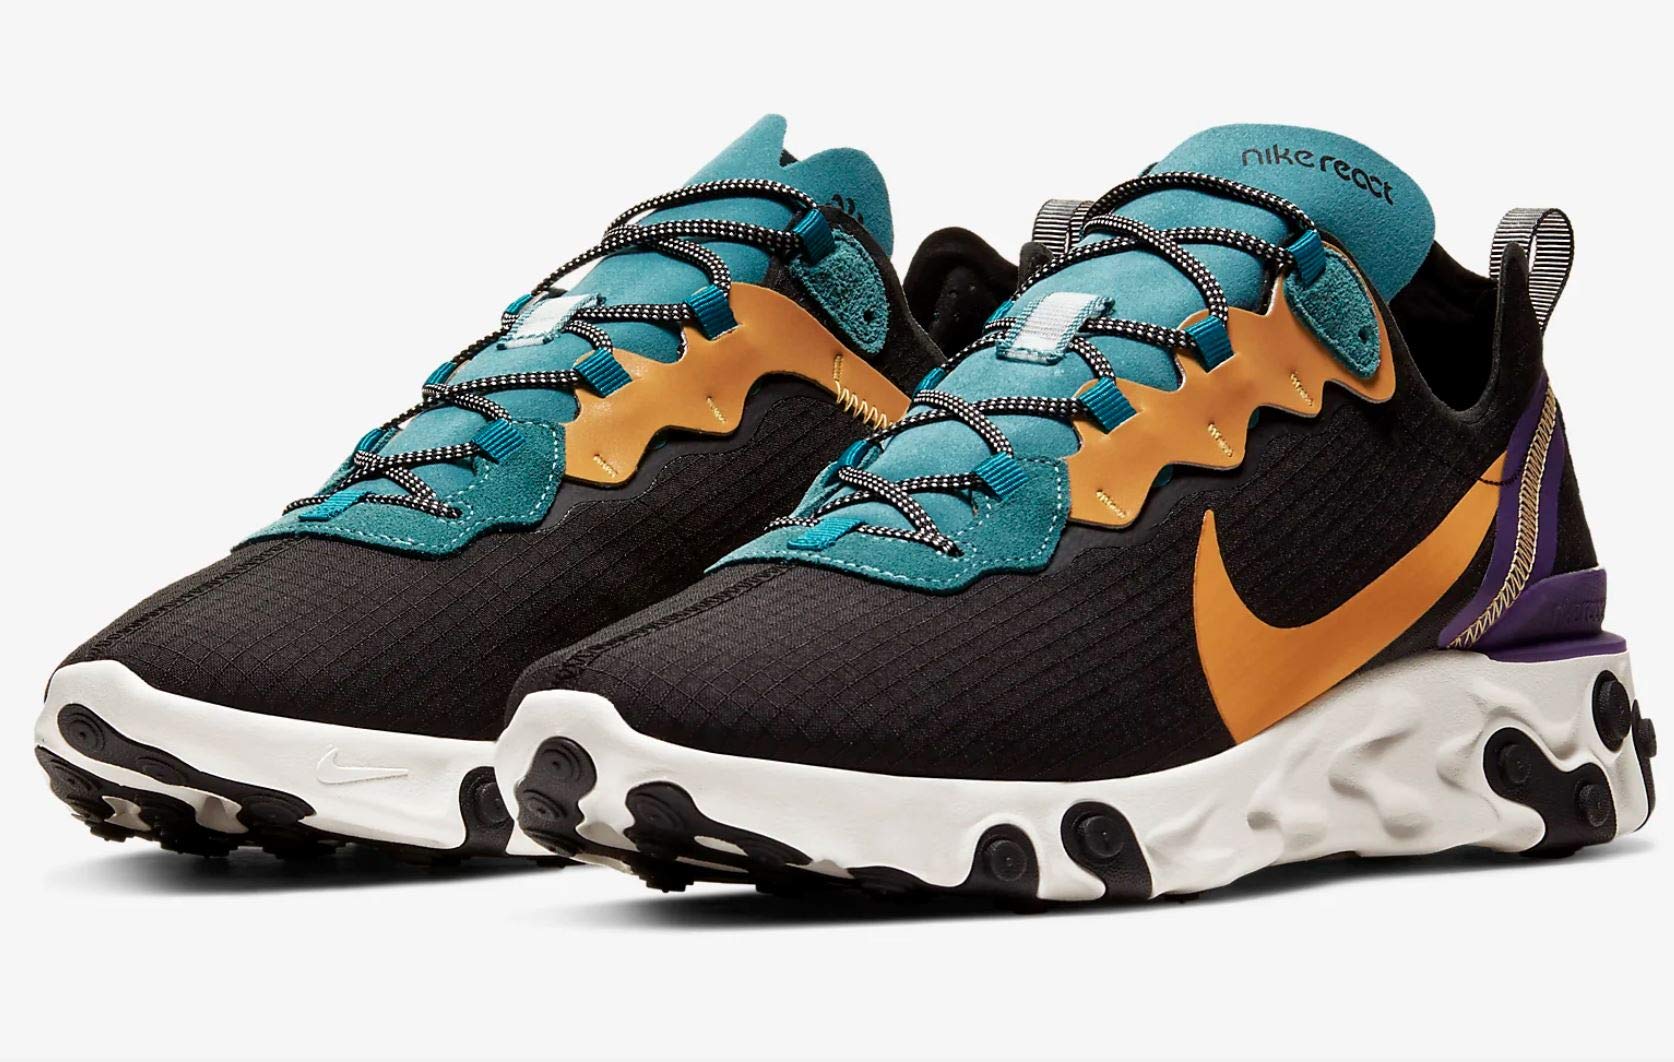 Nike Mens React Element 55 Premium Casual Running Shoes (9) - image 2 of 4